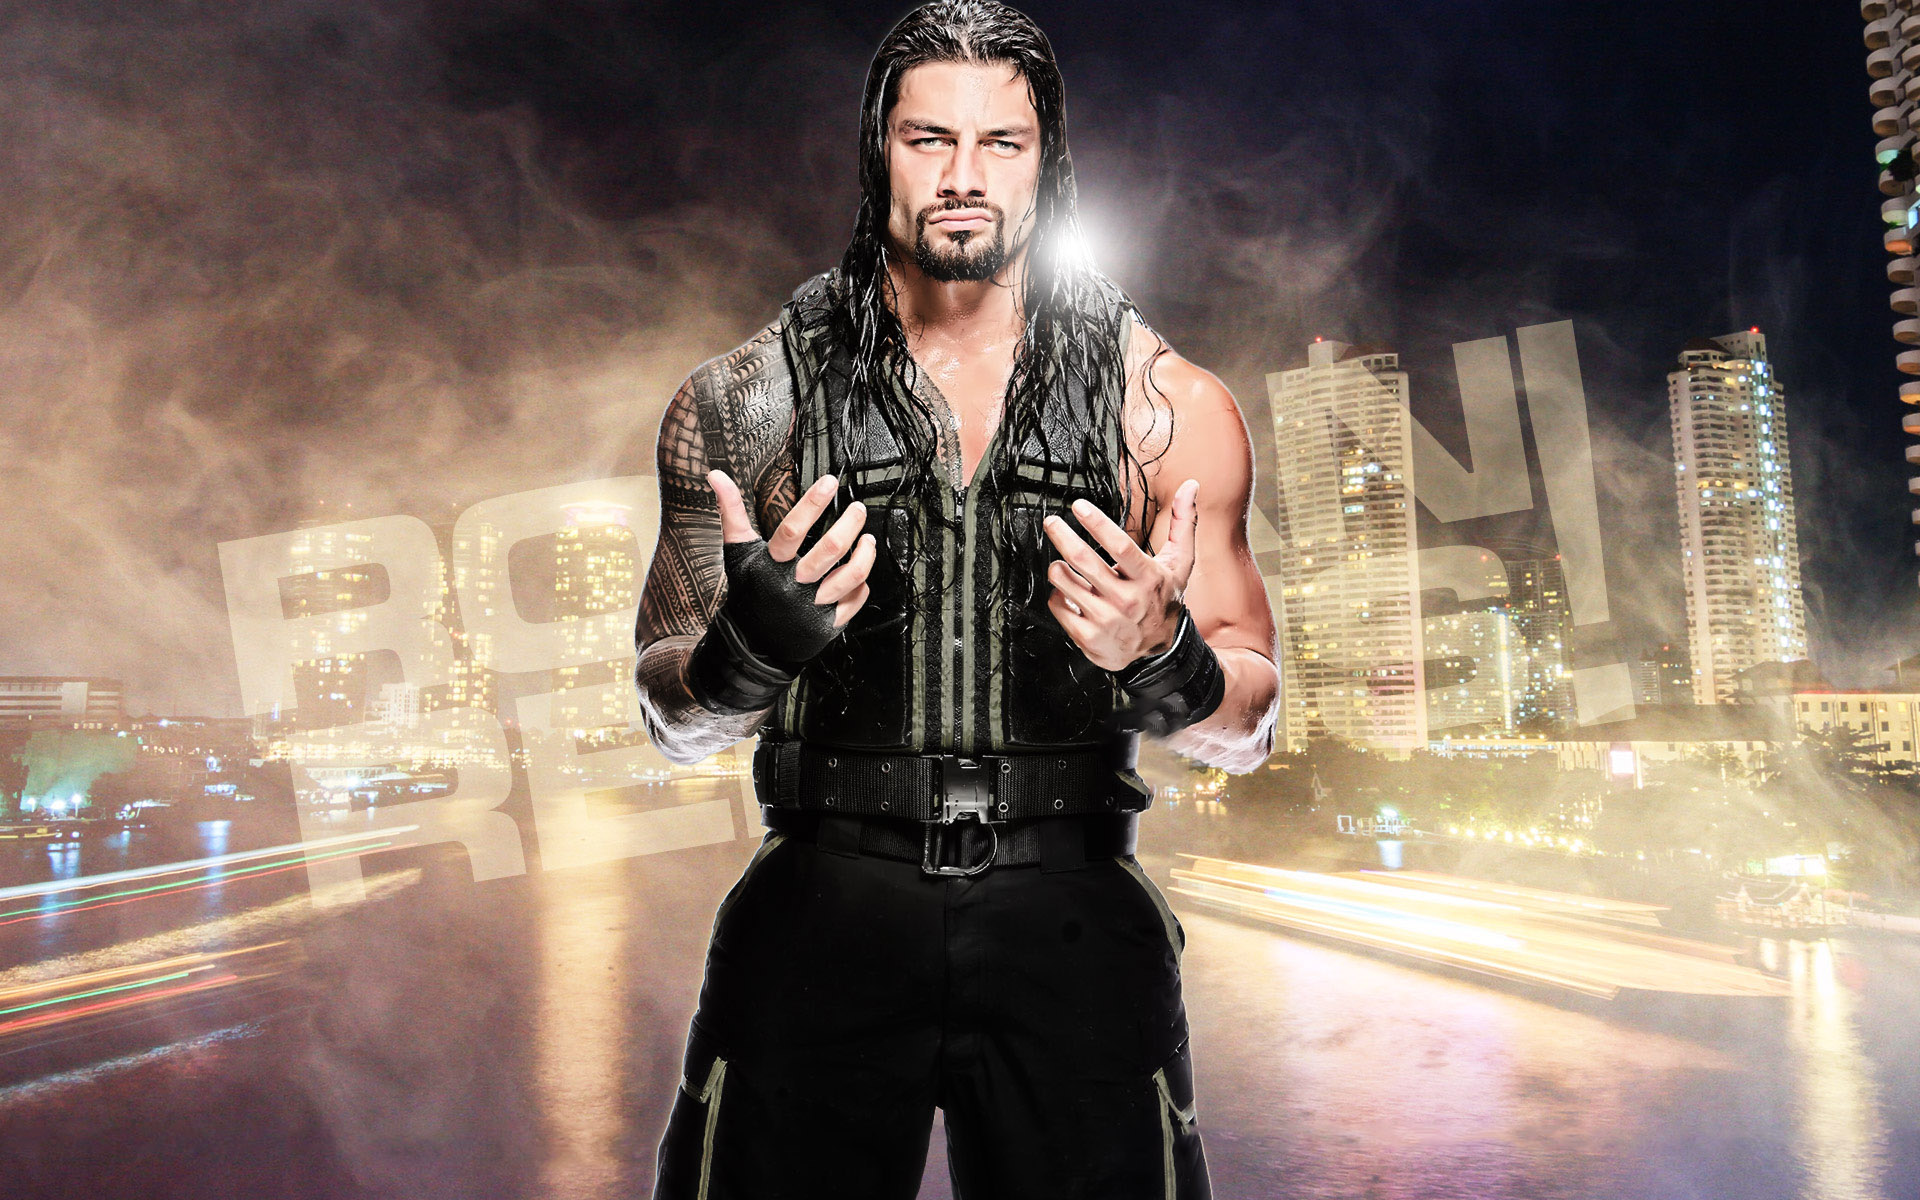 Free download Free Download WWE Roman Reigns HD Wallpaper 2016 [1920x1200]  for your Desktop, Mobile & Tablet | Explore 47+ Roman Reigns HD Wallpaper  2016 | WWE Roman Reigns Wallpaper, Roman Reigns